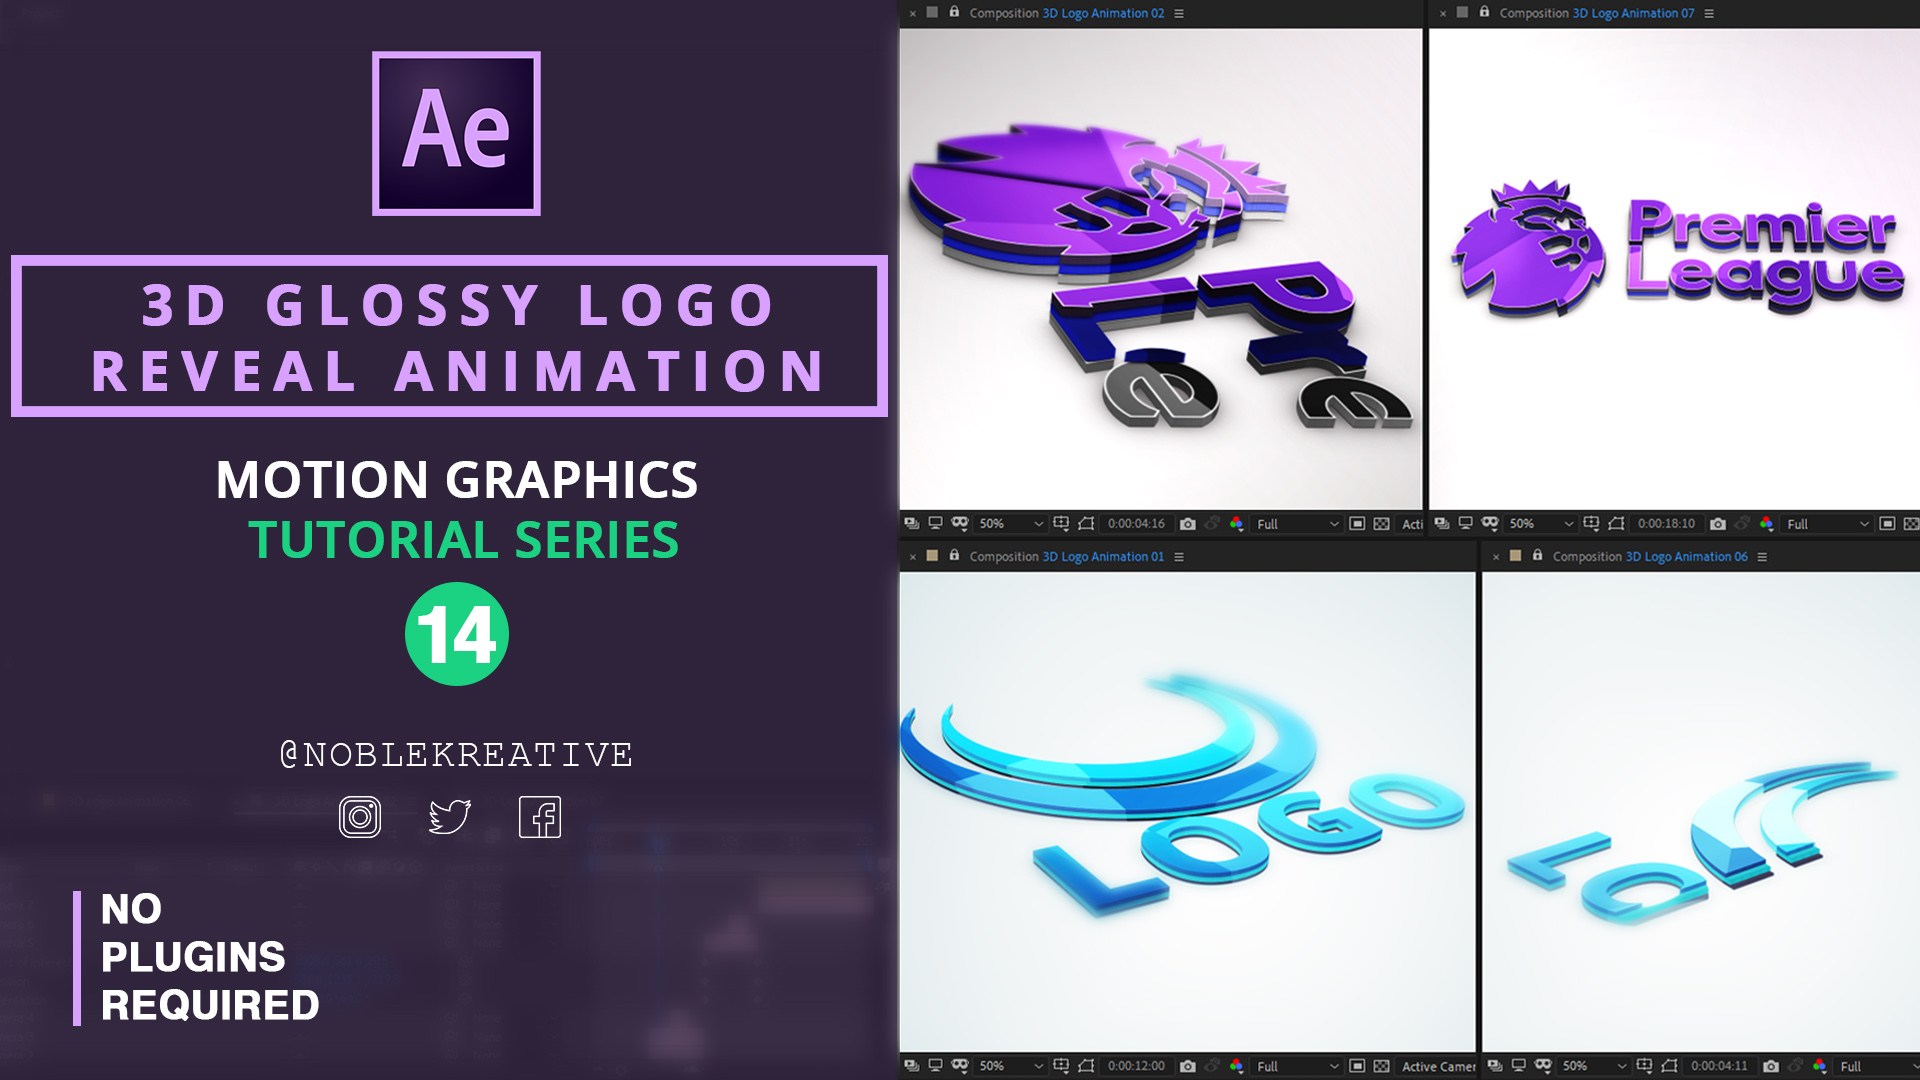 3D Glossy Logo Reveal Animation in AE - Noble Kreative